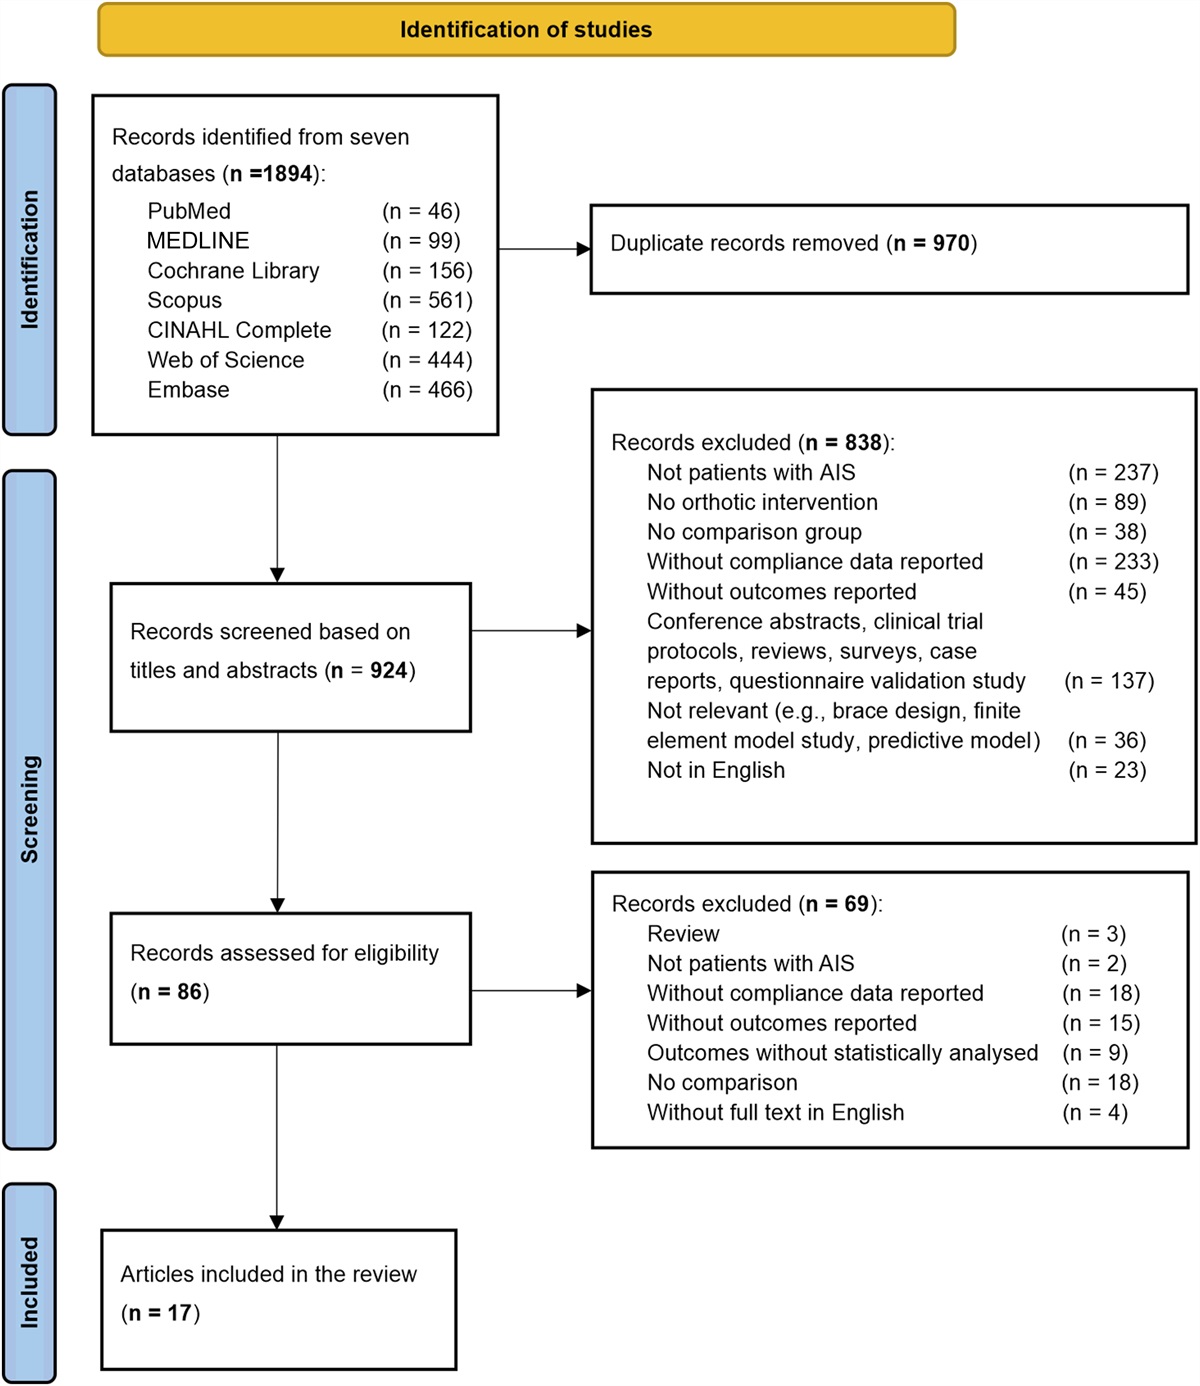 Effectiveness of Orthotic Treatment on Clinical Outcomes of the Patients with Adolescent Idiopathic Scoliosis Under Different Wearing Compliance Levels: A Systematic Review